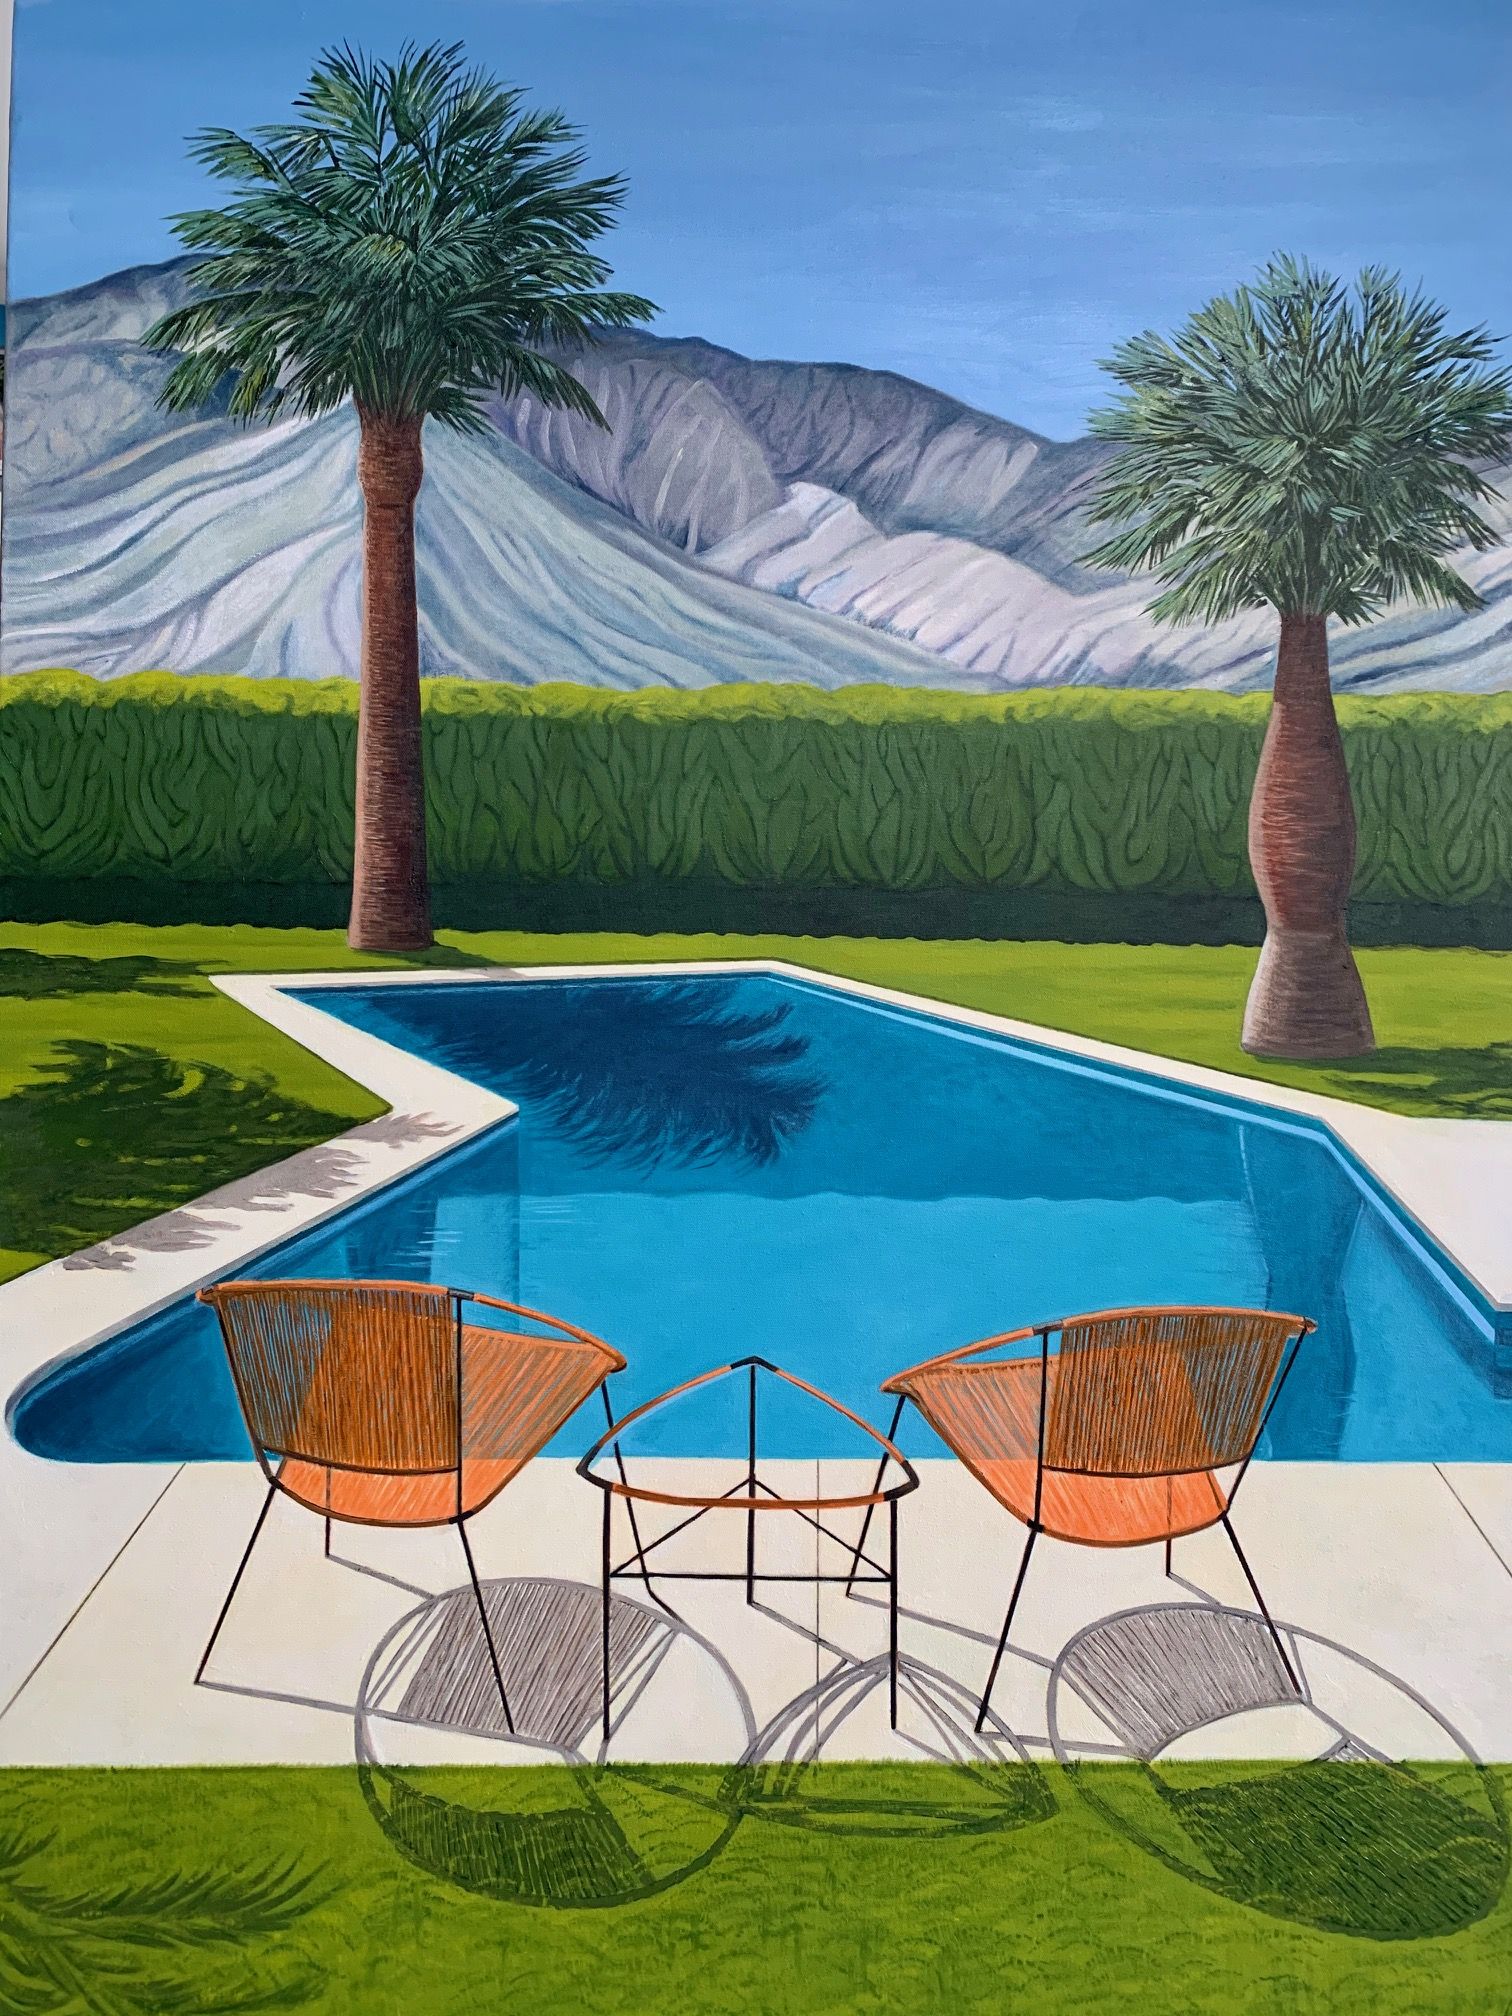 Come And Sit By The Pool by Karen Lynn